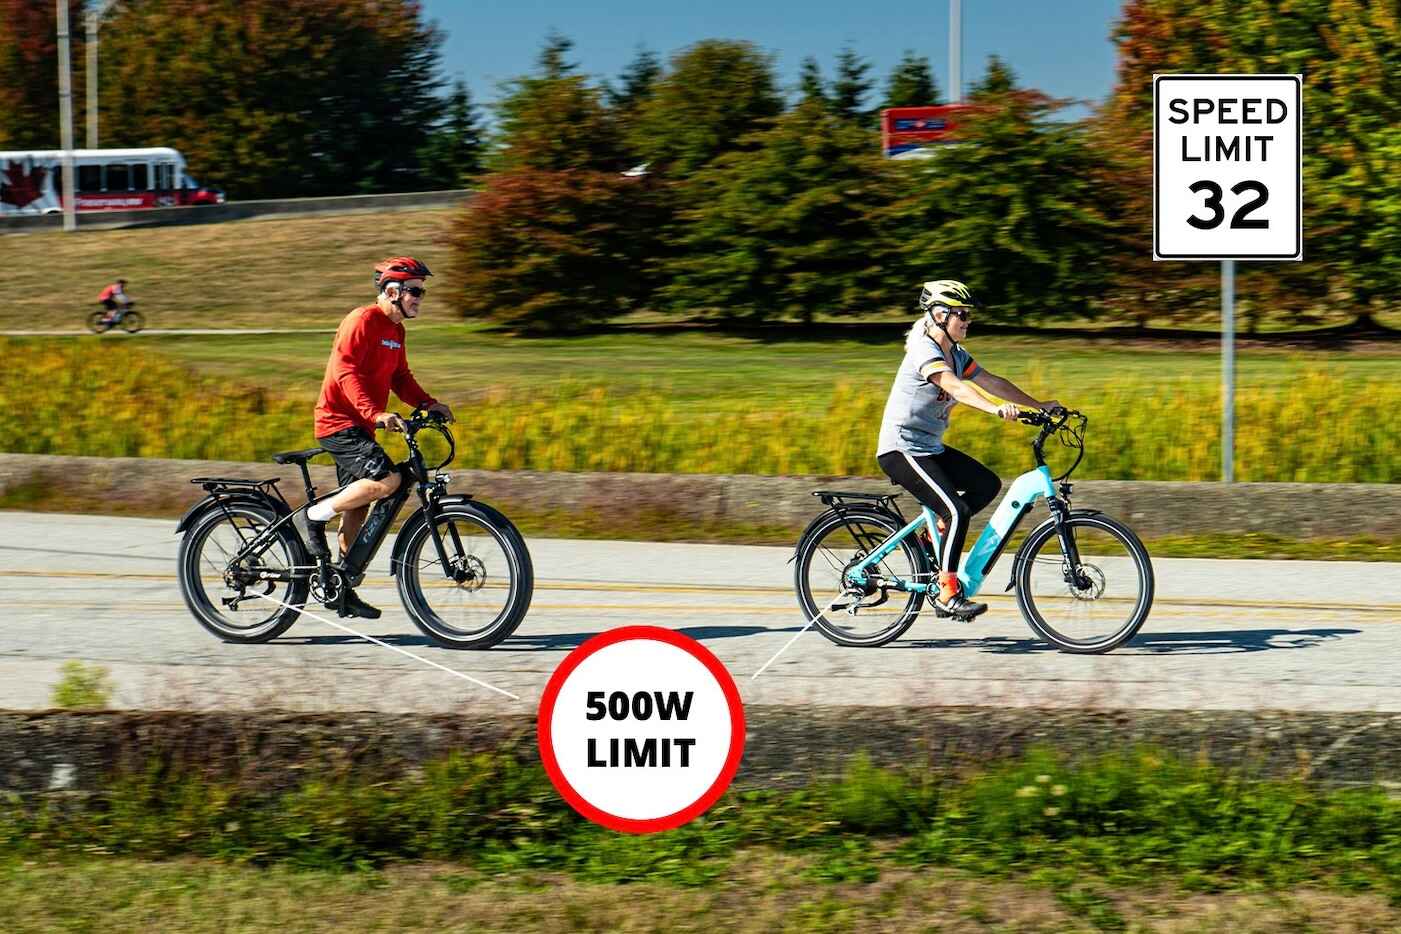 eBike Laws in Canada: Laws and Regulations For Each Province